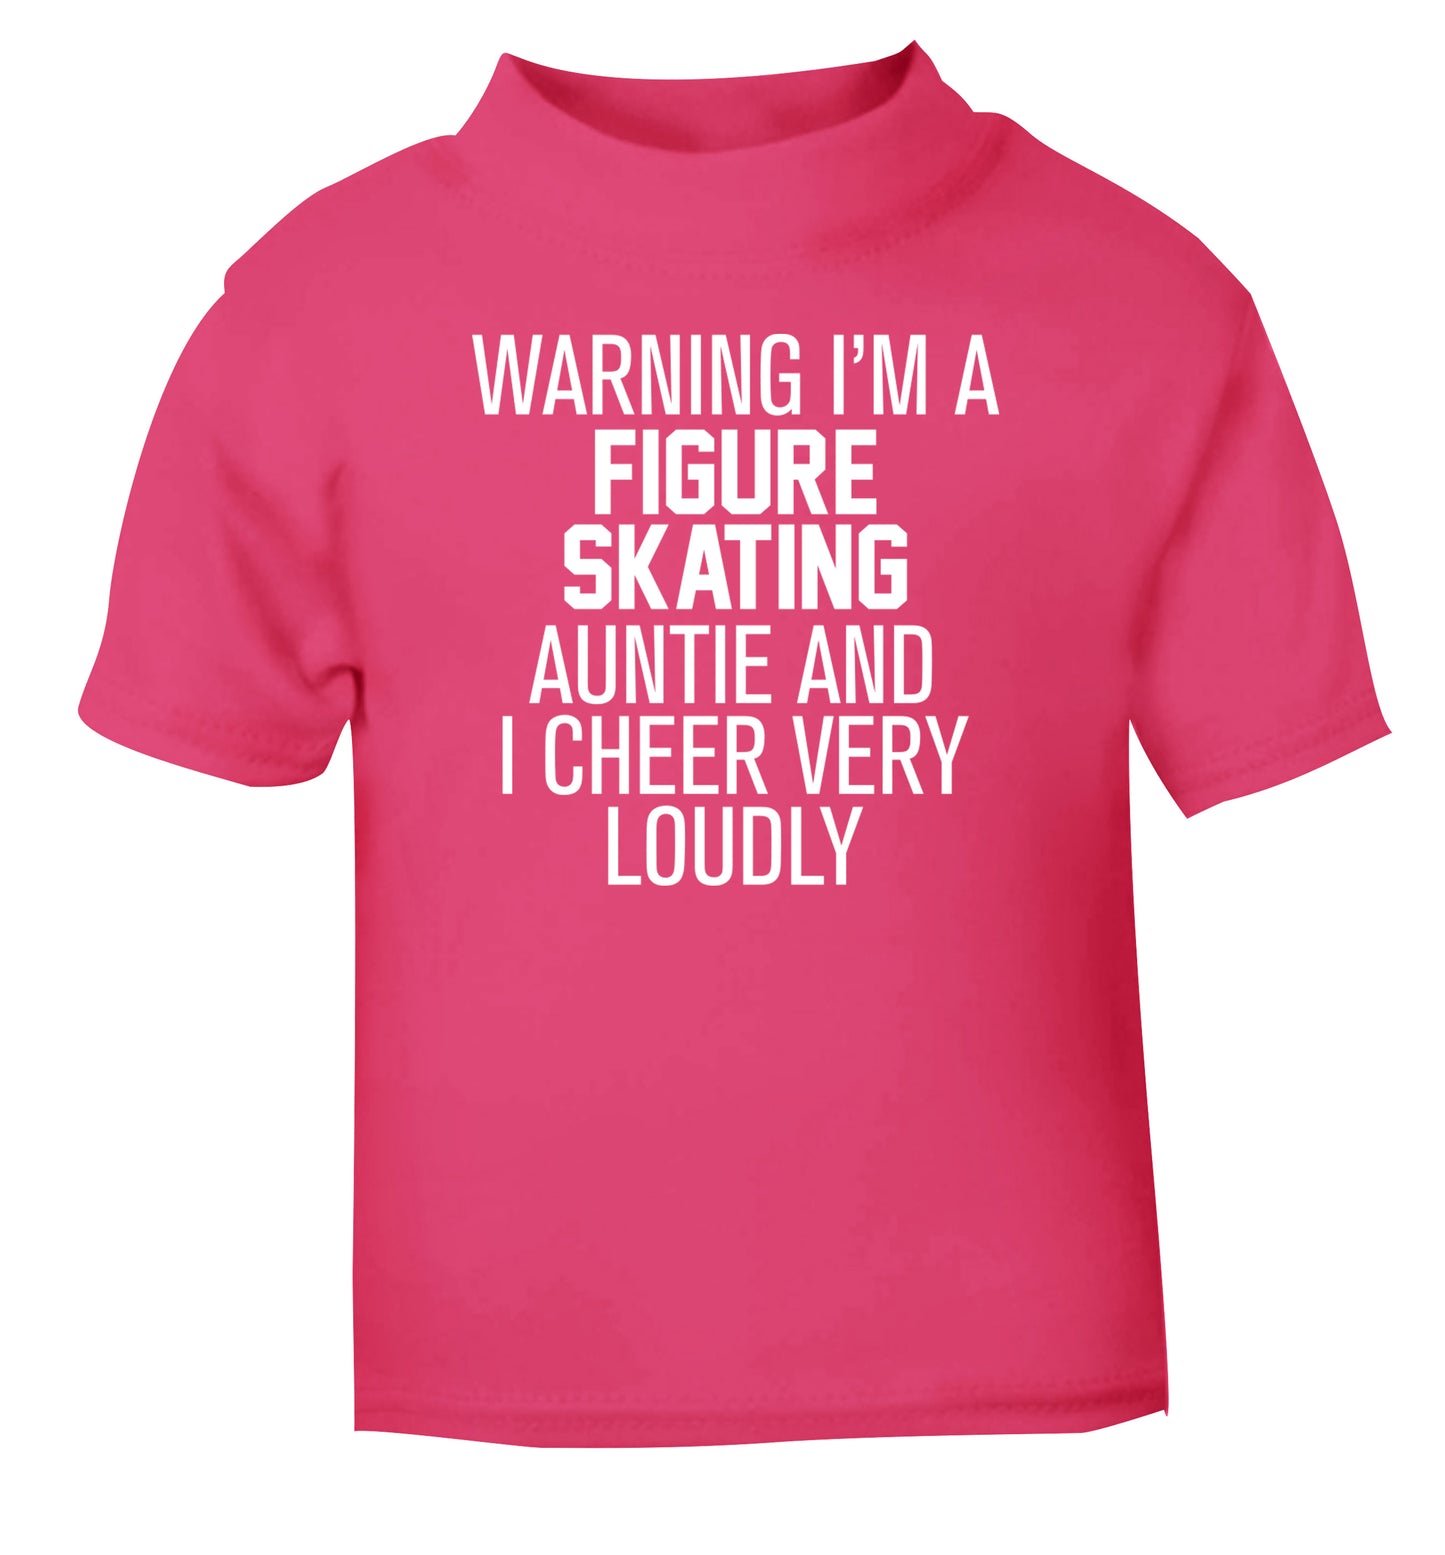 Warning I'm a figure skating auntie and I cheer very loudly pink Baby Toddler Tshirt 2 Years